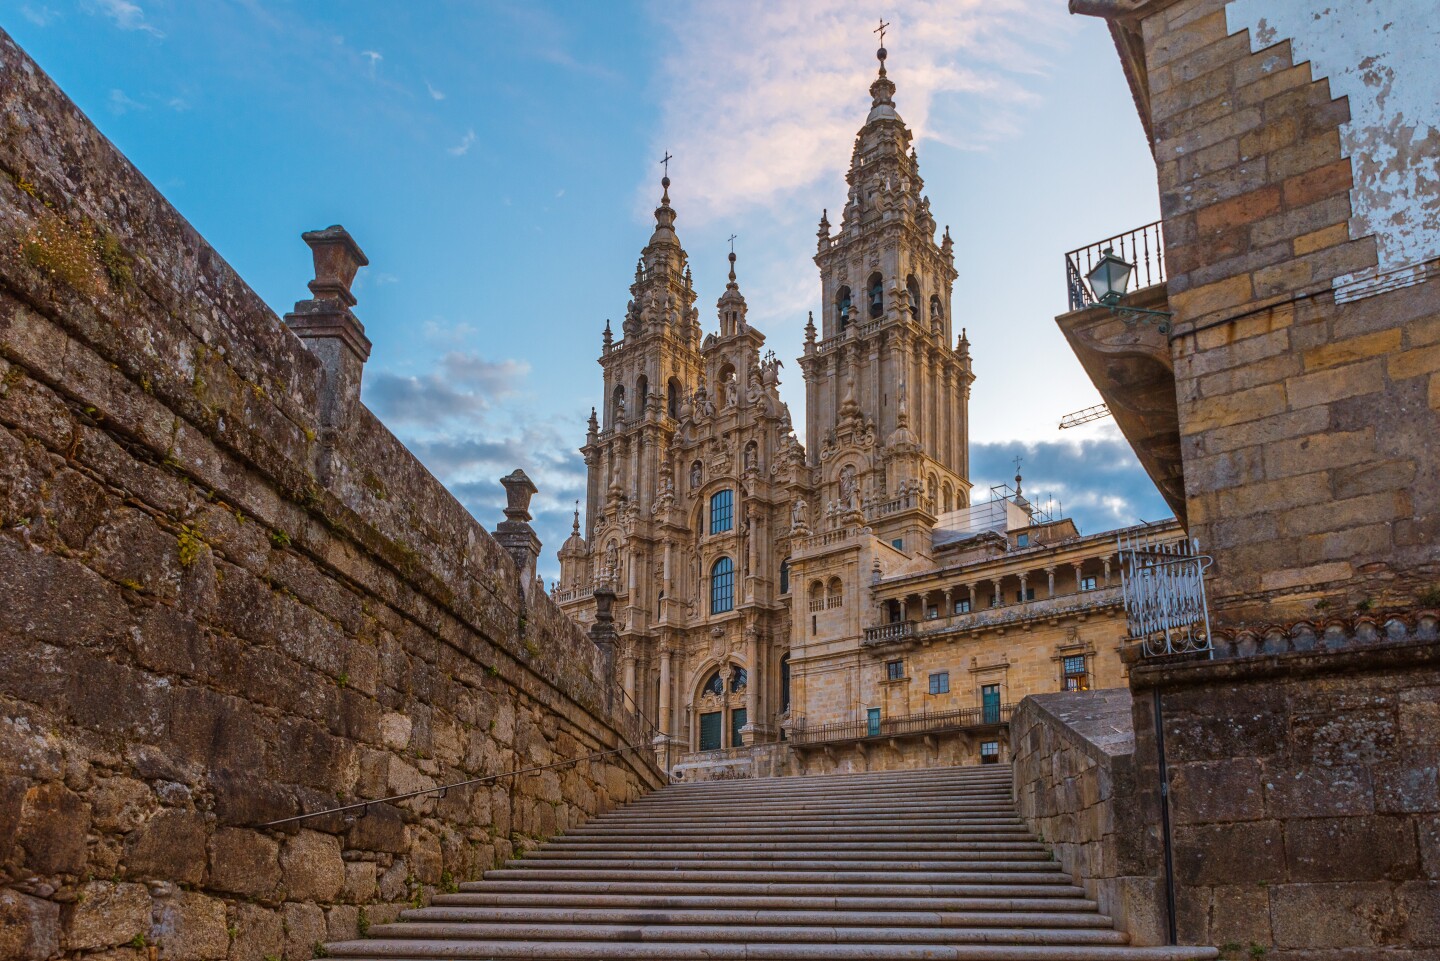 <h2>10. Santiago de Compostela</h2> <p><i>Galicia</i></p> <p>During the Middle Ages, people walked from the south of France to the northeastern tip of Spain as a way to show faith, establishing a 500-mile route known as the Camino de Santiago. Santiago de Compostela, the capital of Galicia, is the endpoint of this pilgrimage and punctuates the end of the trip with its Romanesque-style cathedral. Even if you’re not a pilgrim, this city is a worthwhile place for exploring religious history and some of the dishes Galicia has to offer, from regional cheeses to seaside delicacies like <i>percebes</i> (aka barnacles).</p>